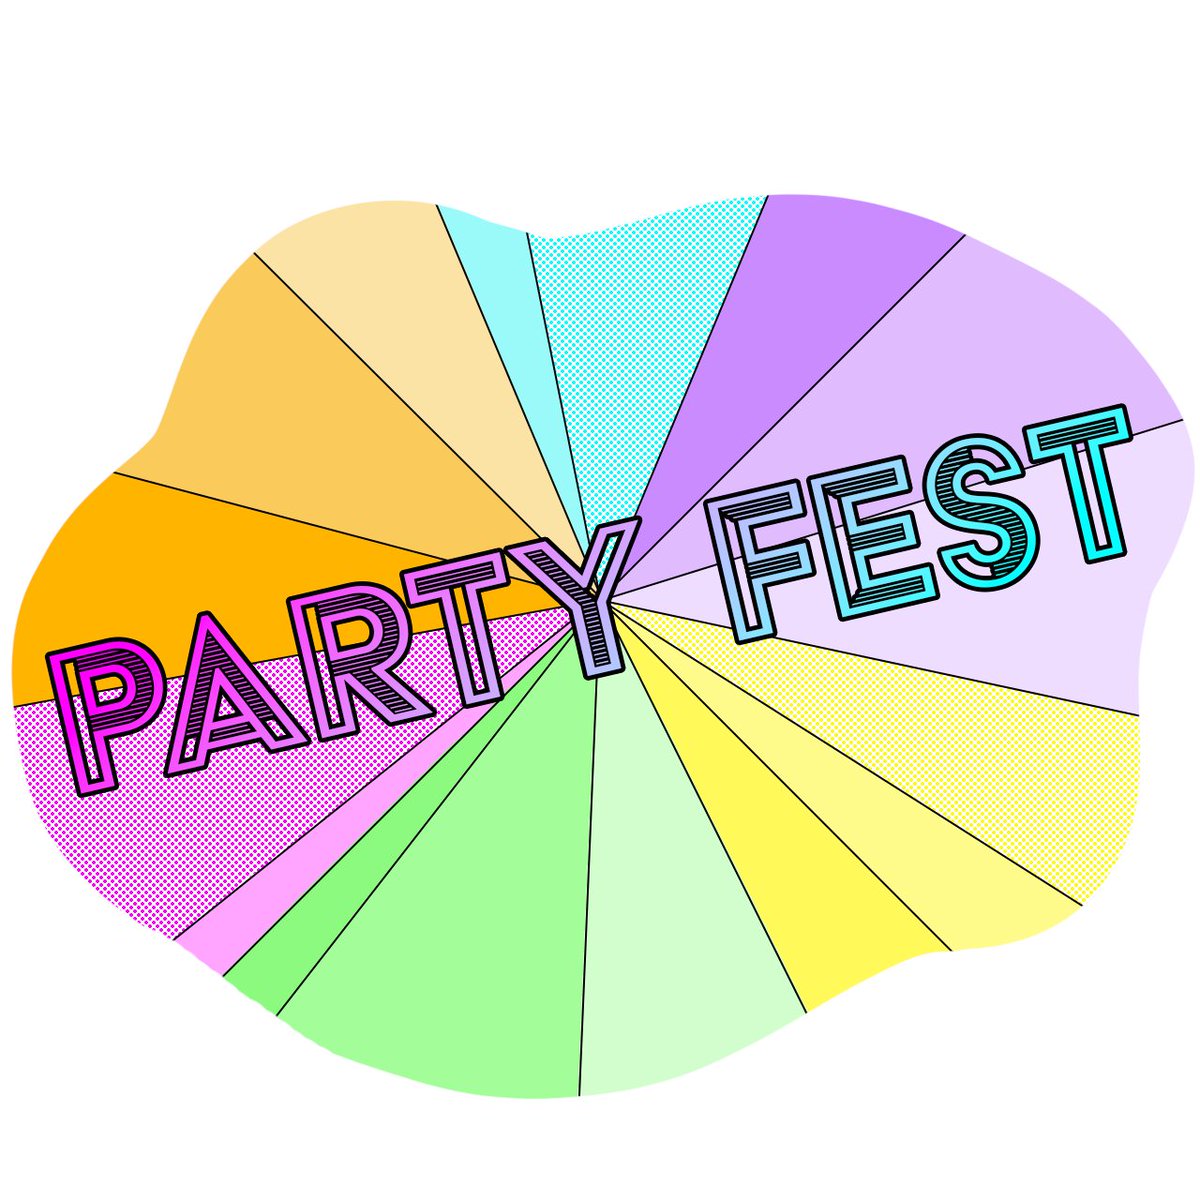 🚨NOW ANNOUNCING PARTY FEST
📅January 23rd - January 27th

ℹ️Party Fest is a 5 day online event celebrating party games and community. 

Check out the website for more information. radiantgardeners.com/partyfest